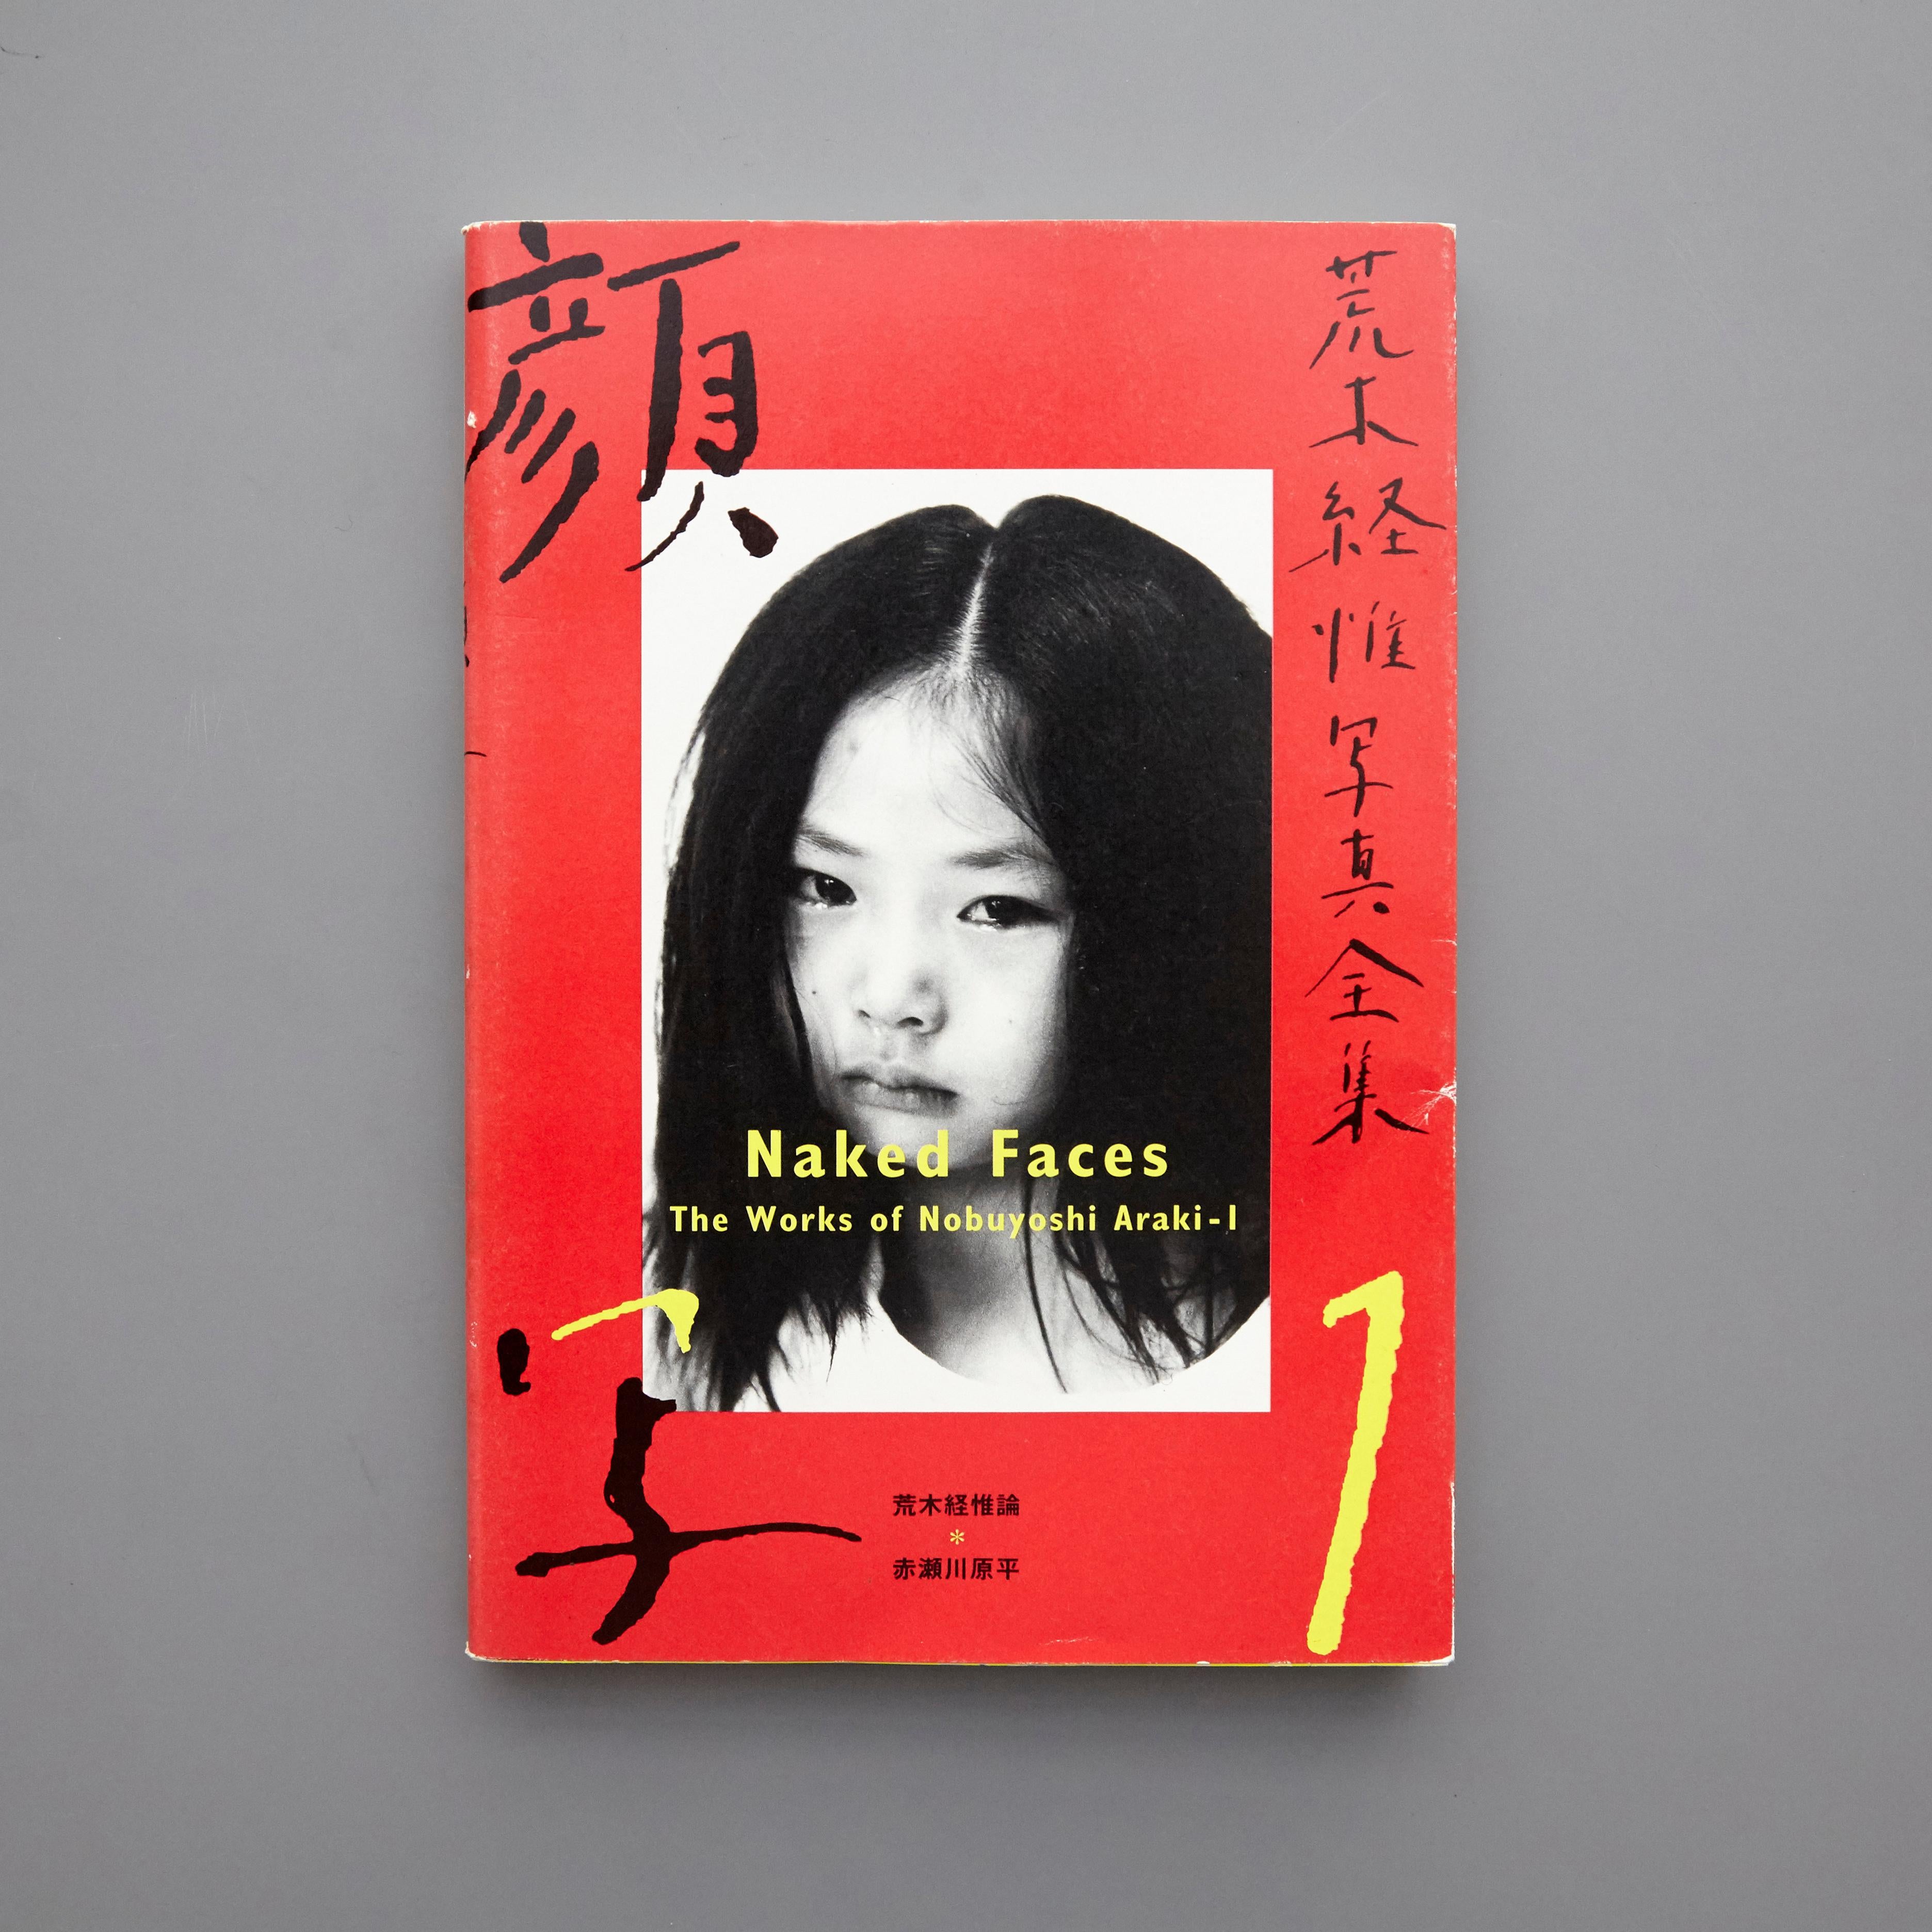 The works of Nobuyoshi Araki Book collection complete 1-20 published in Japan in 1996 by Heibonsha Limited, Publisher.

20 books complete collection Limited edition.

Nobuyoshi Araki born May 25, 1940) is a Japanese photographer and contemporary